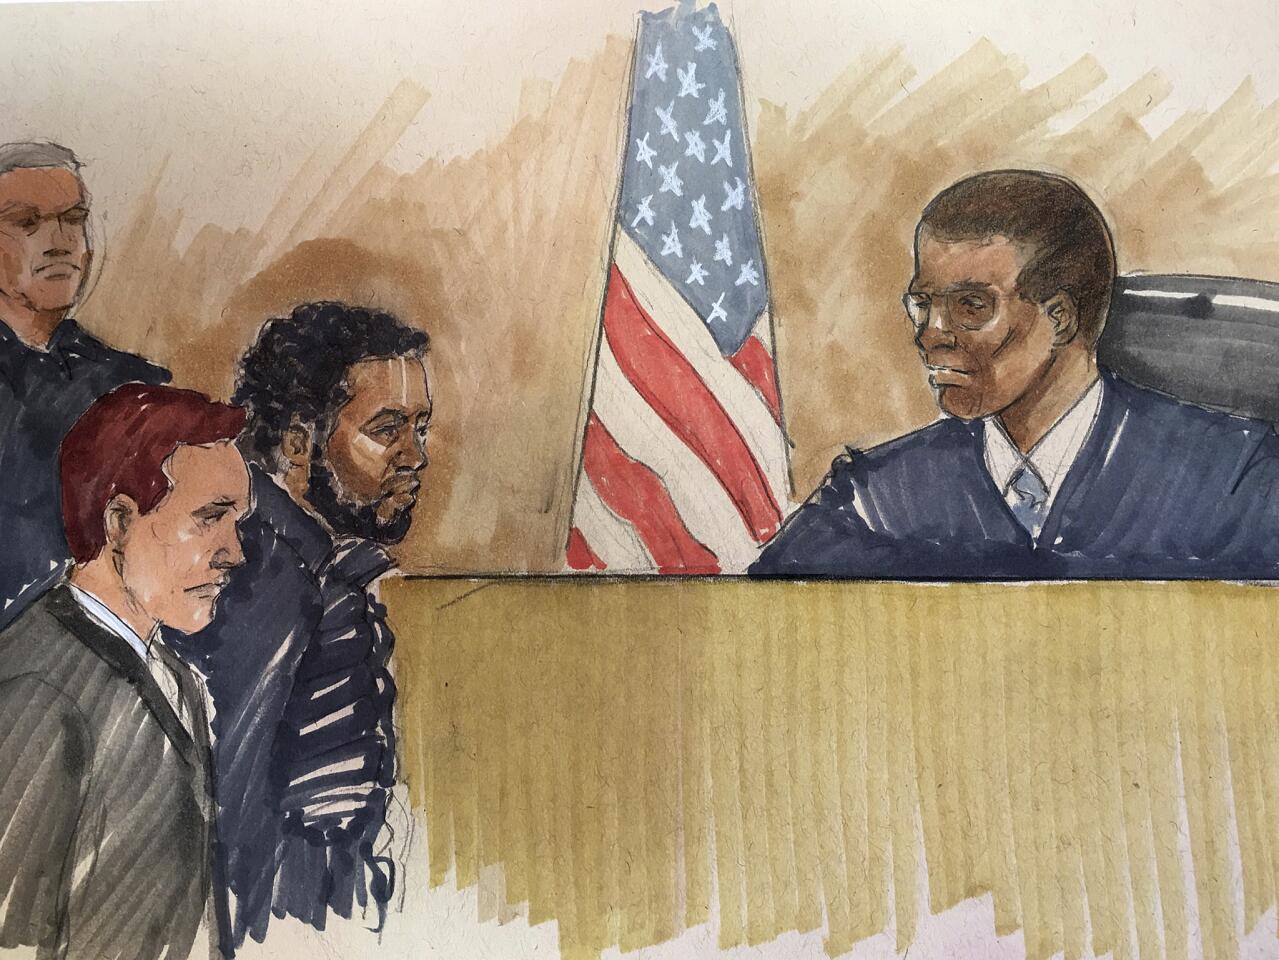 In this courtroom sketch, "Empire" actor Jussie Smollett, appears in from before Cook County Judge John Fitzgerald Lyke Jr. with his attorney Jack Prior at Cook County Court, Feb. 21, 2019, in Chicago. Smollett has made his first court appearance on charges that he falsely reported being beaten by two men last month in downtown Chicago. The judge set bond at $100,000, meaning that Smollett must post $10,000 to be released. Police say the 36-year-old actor staged a racist, anti-gay attack on himself because he was unhappy about his salary and wanted to promote his career. Smollett said little during the hearing, except to state his name.